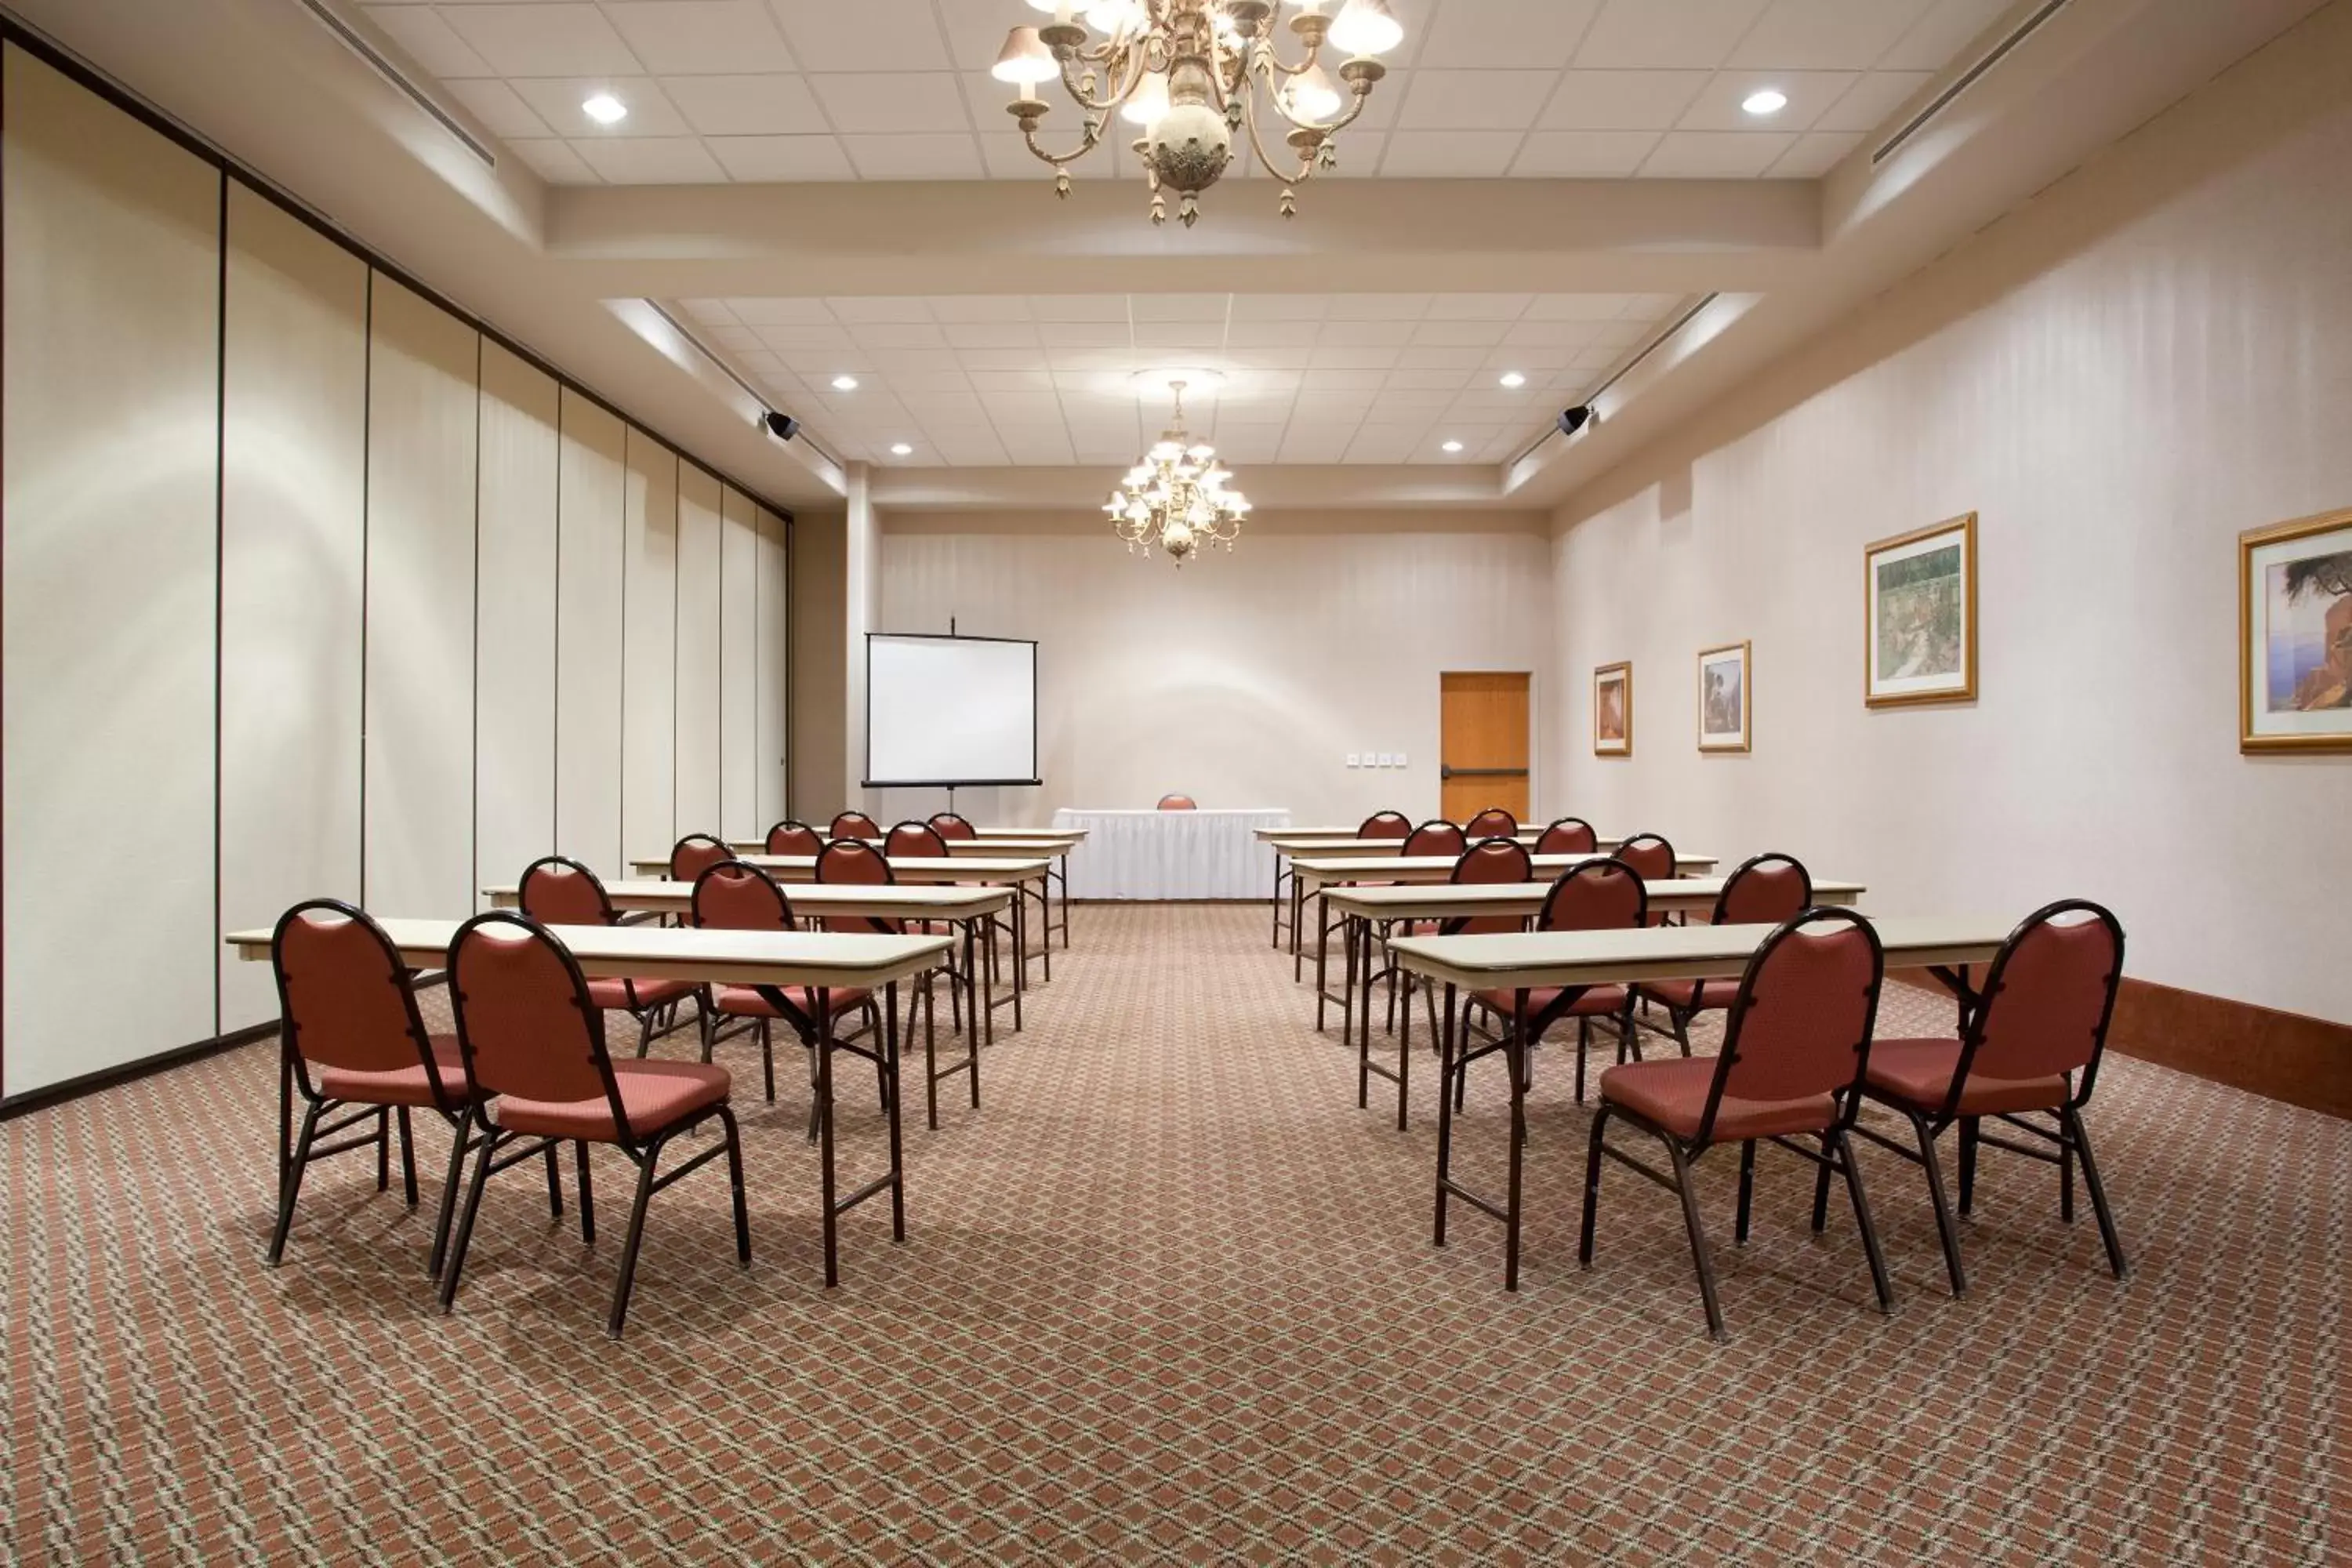 Business facilities in Baymont by Wyndham Belen NM